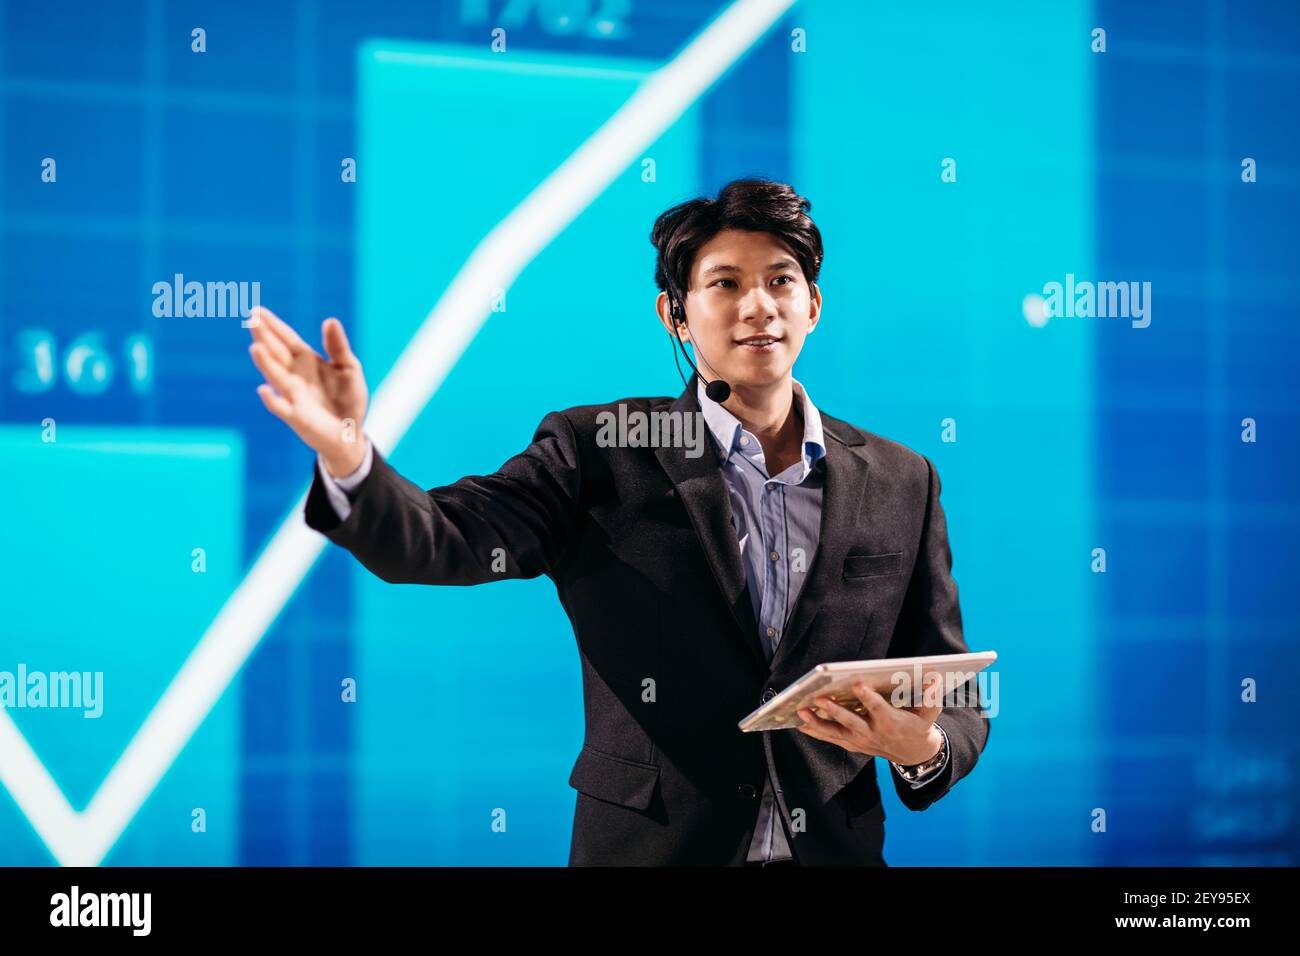 Asian Businessman Stands on Stage for Business Presentation Stock Photo